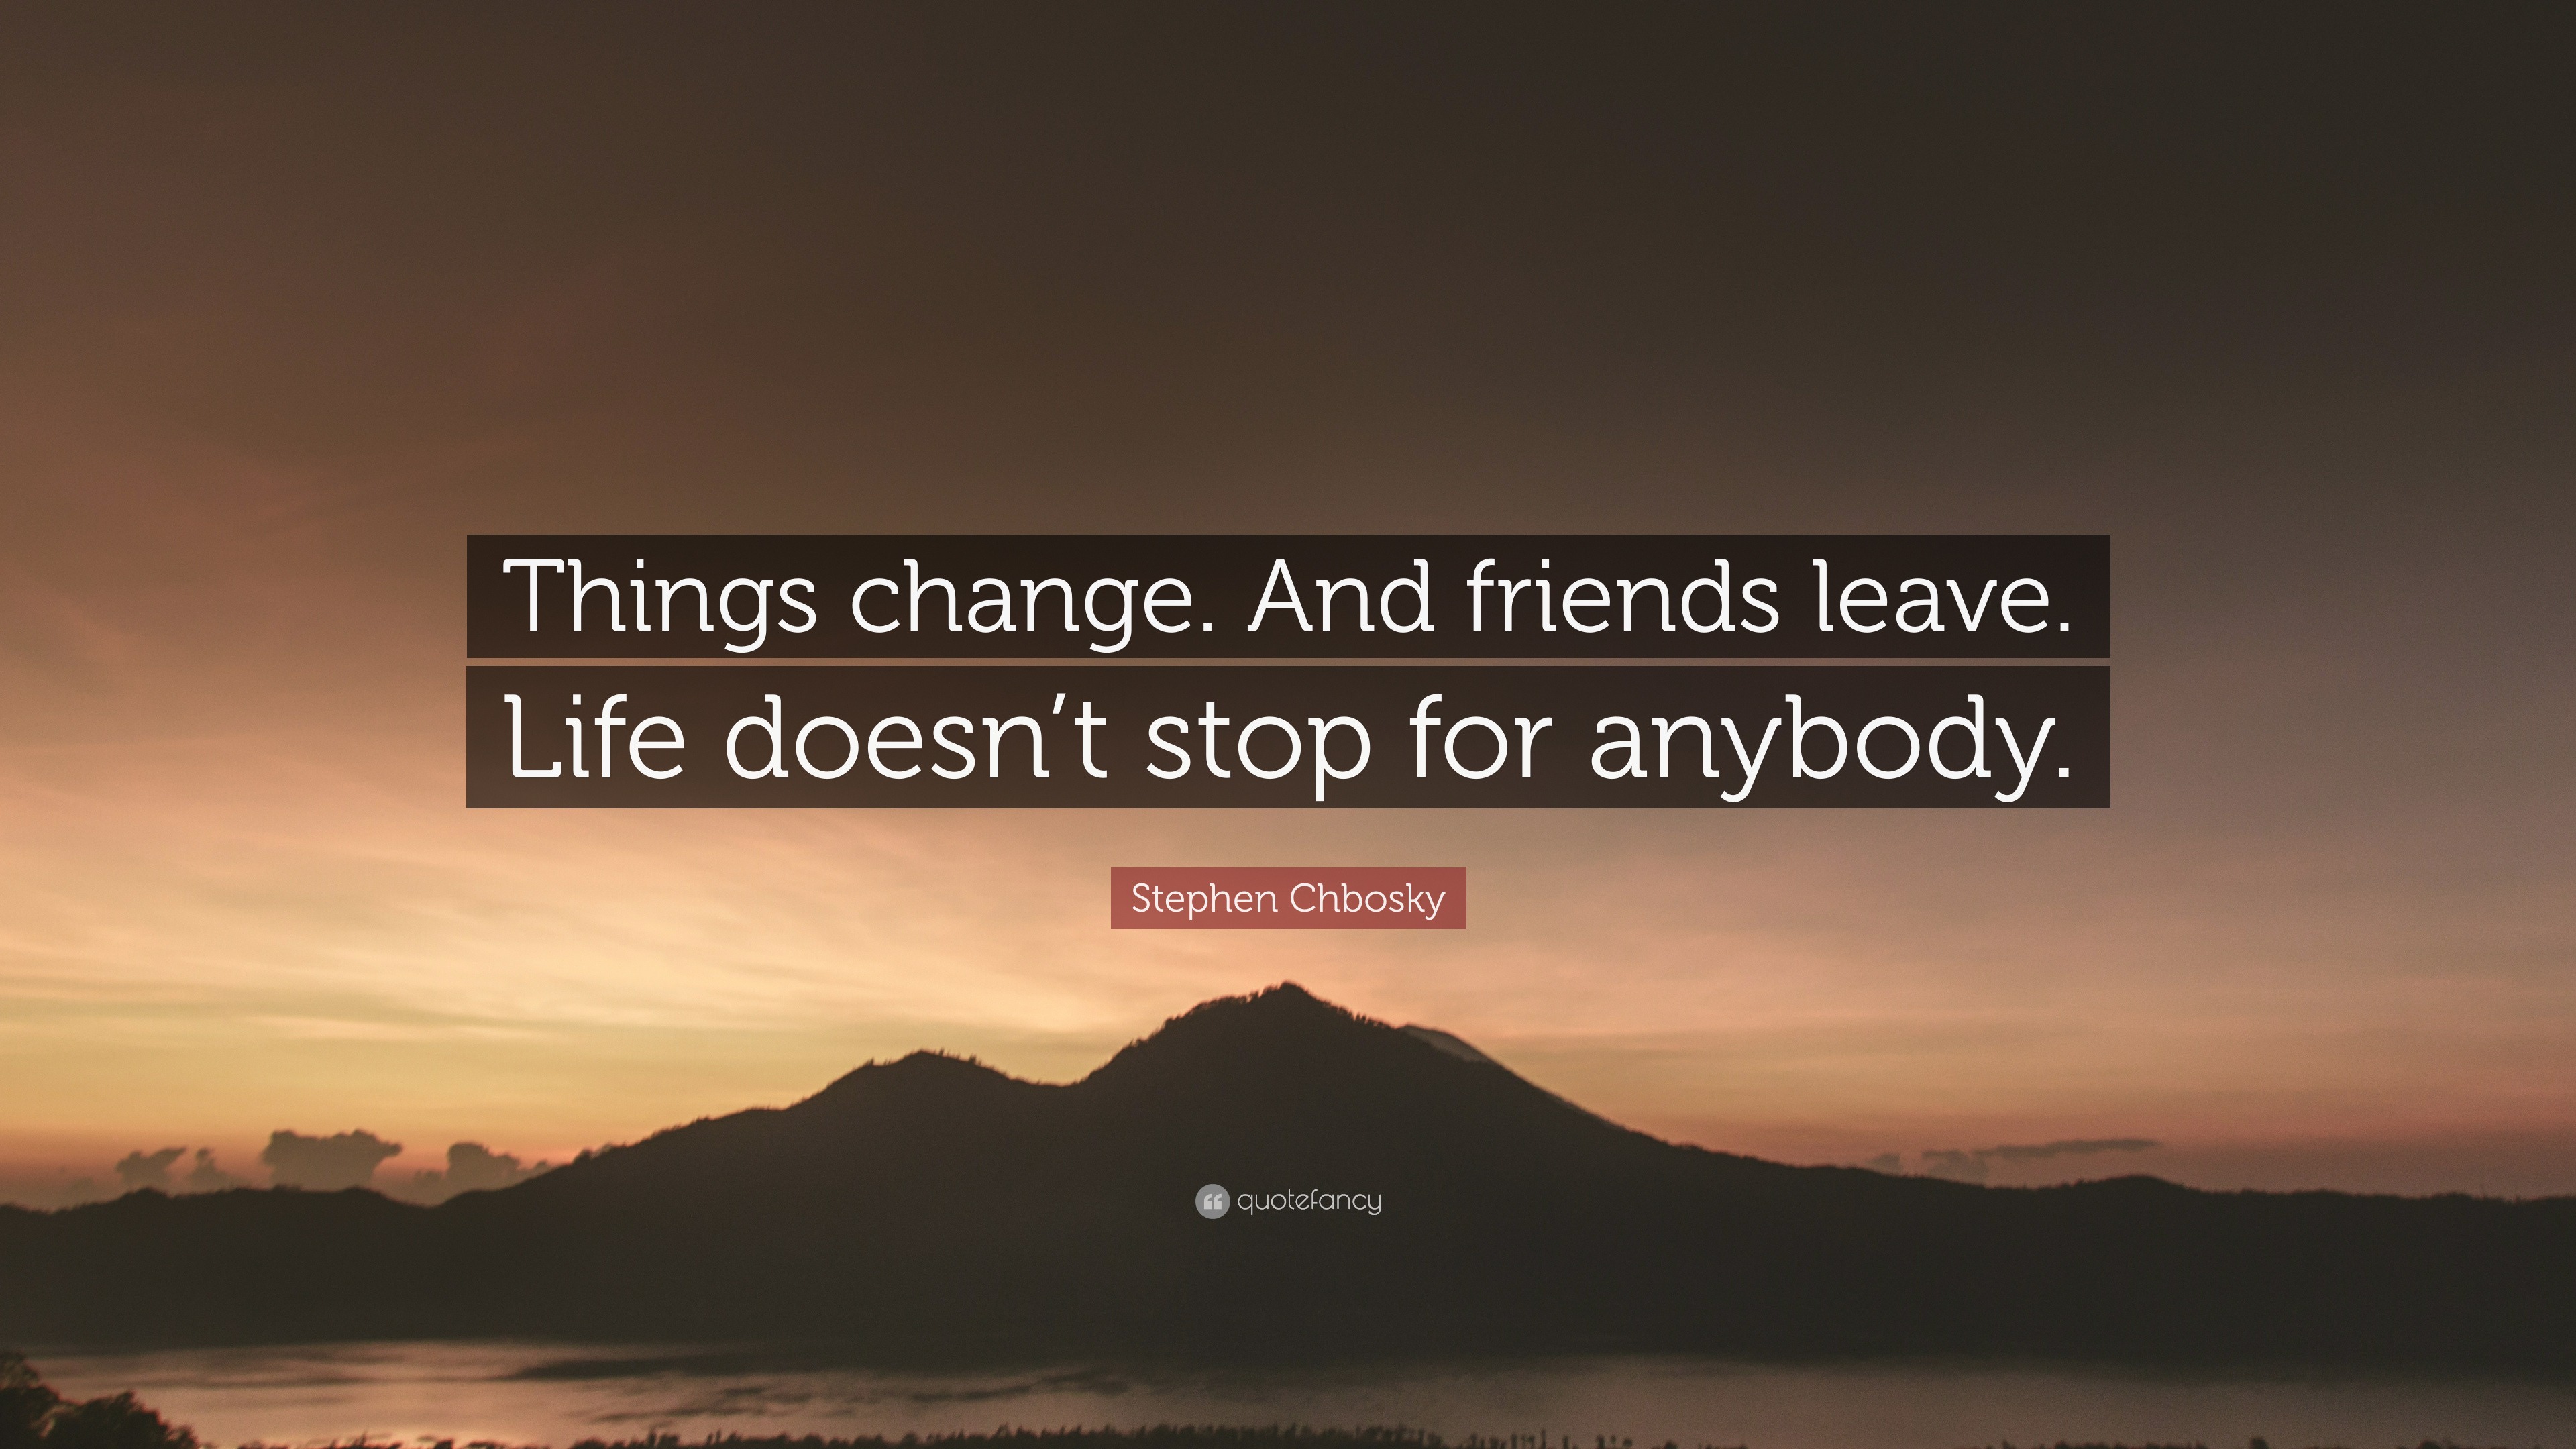 Stephen Chbosky Quote “Things change And friends leave Life doesn t